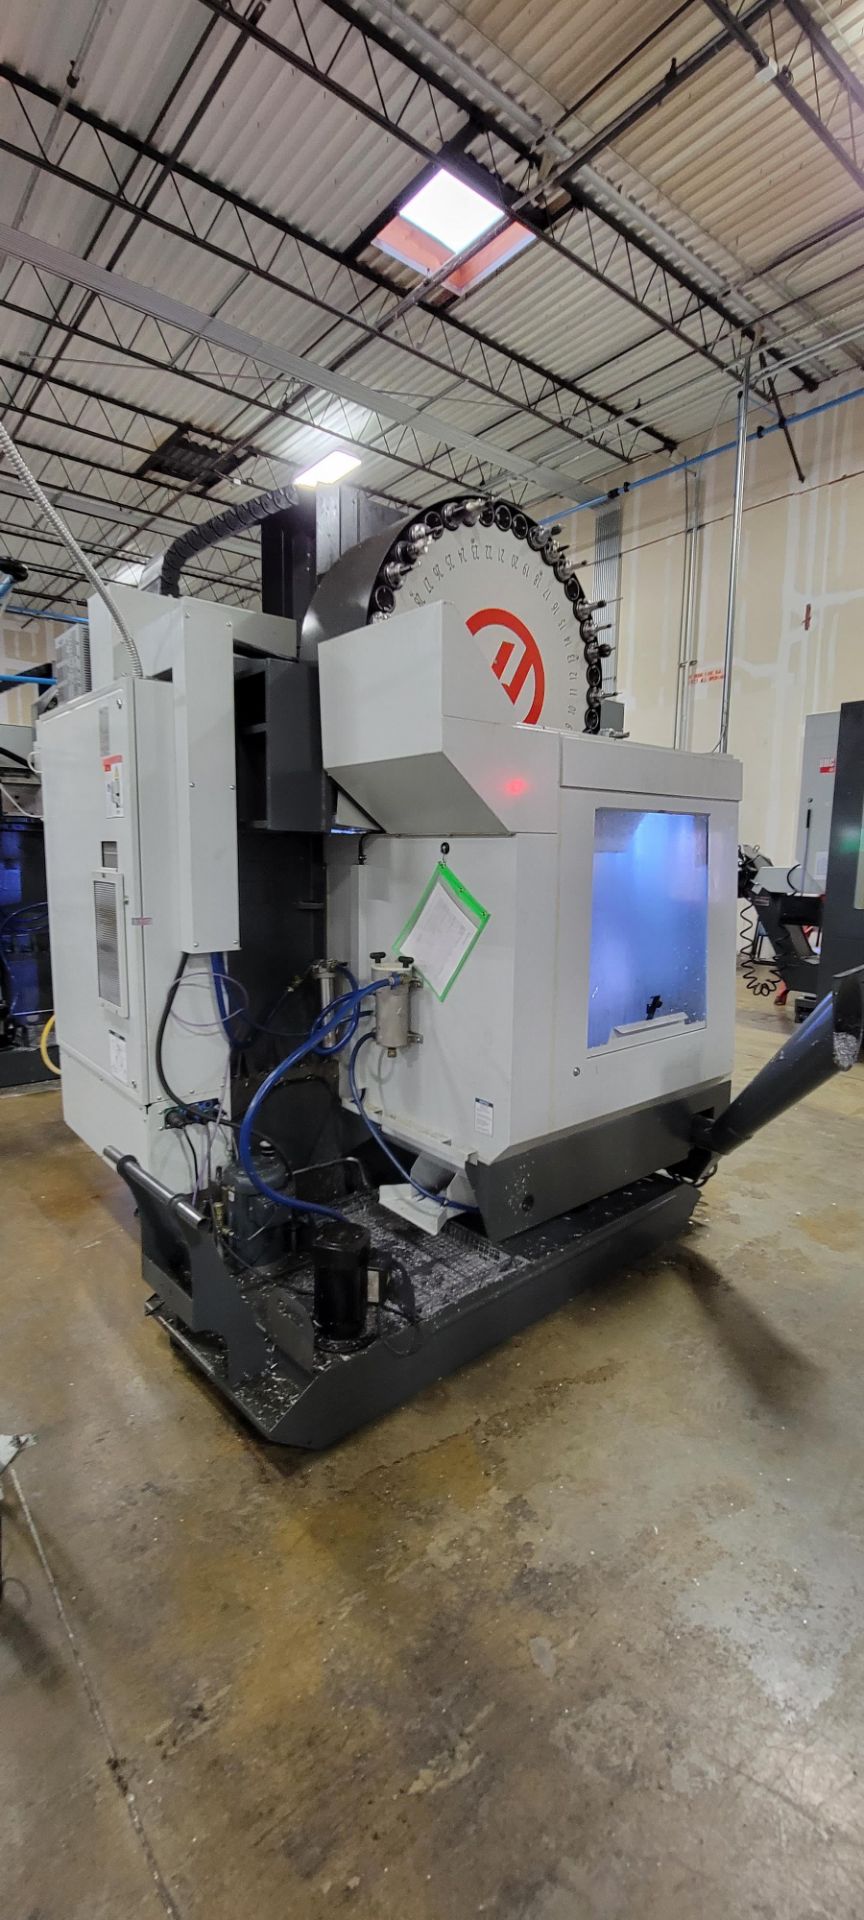 Haas VF-2SSYT 3-Axis CNC Vertical Machining Center - Image 16 of 18